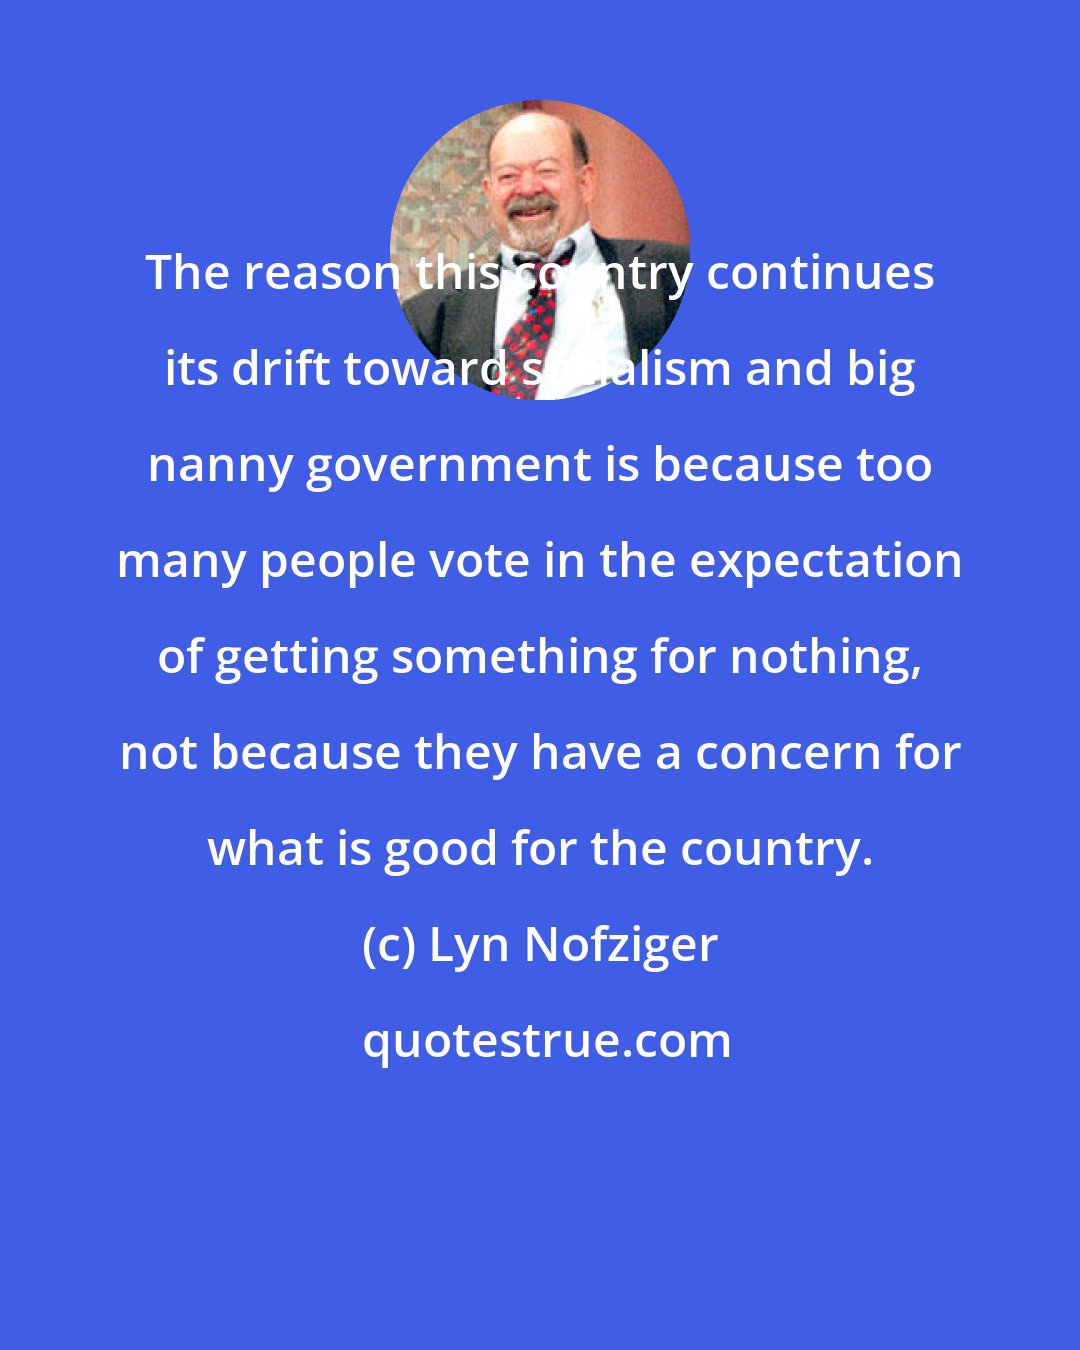 Lyn Nofziger: The reason this country continues its drift toward socialism and big nanny government is because too many people vote in the expectation of getting something for nothing, not because they have a concern for what is good for the country.